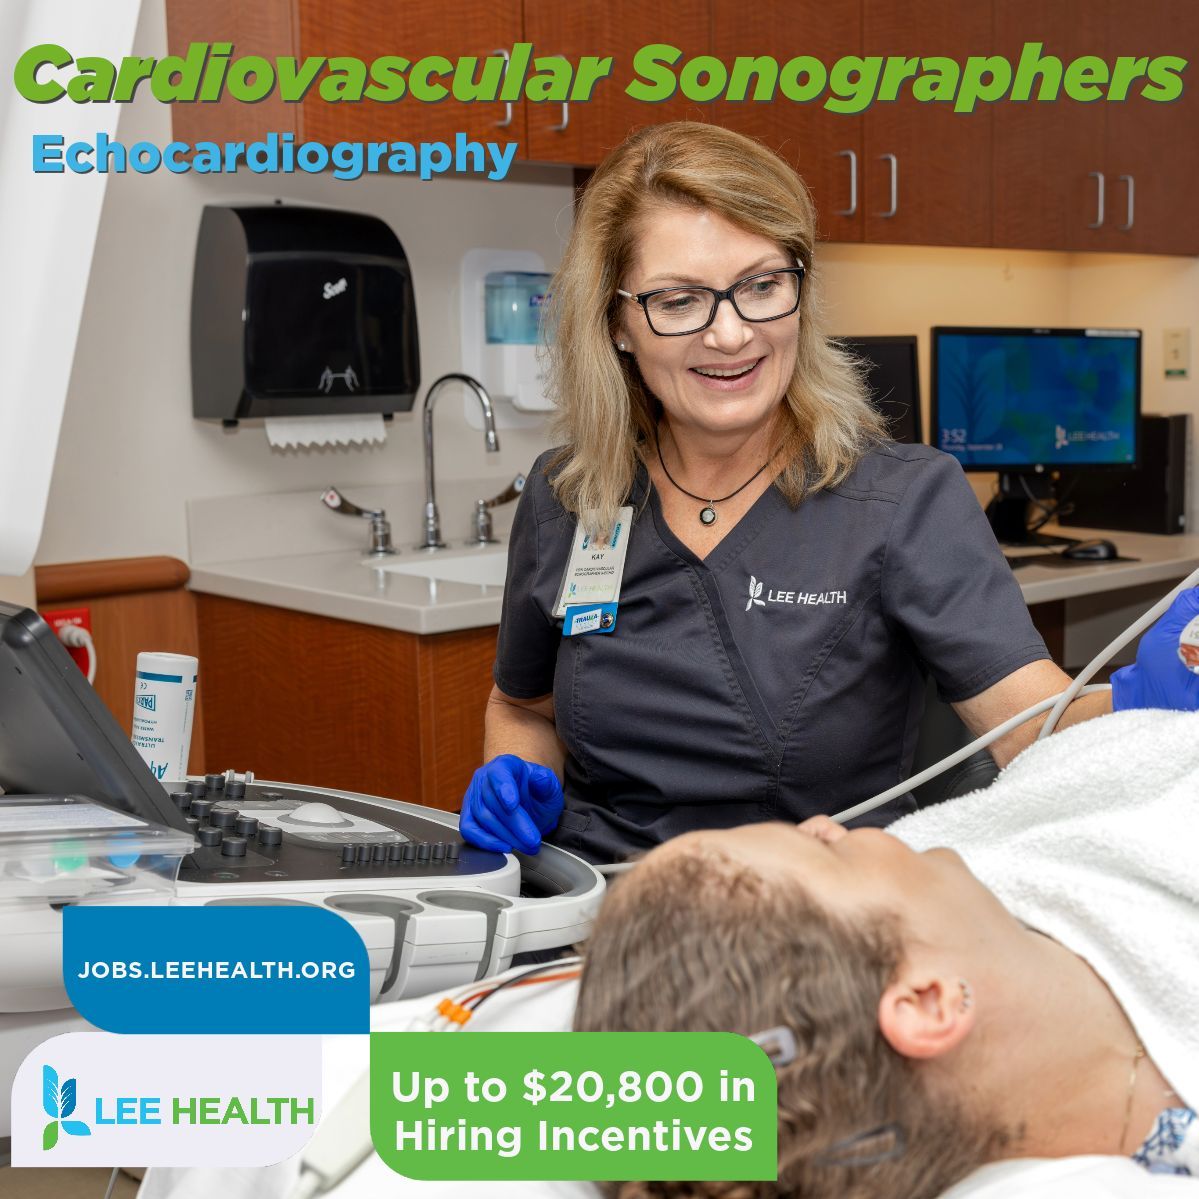 🌟 Join Our Team at Lee Health as a Cardiac Sonographer! 🌟 Up to $20,800 in Hiring Incentives! 💸 Apply now! 🚀 bit.ly/LeeHealth_Card… #LeeHealth #CardiovascularServices #FortMyers #CapeCoral #HealthcareCareers #Echocardiography #ARDMS #RDMS #RDCS #Florida #CCI